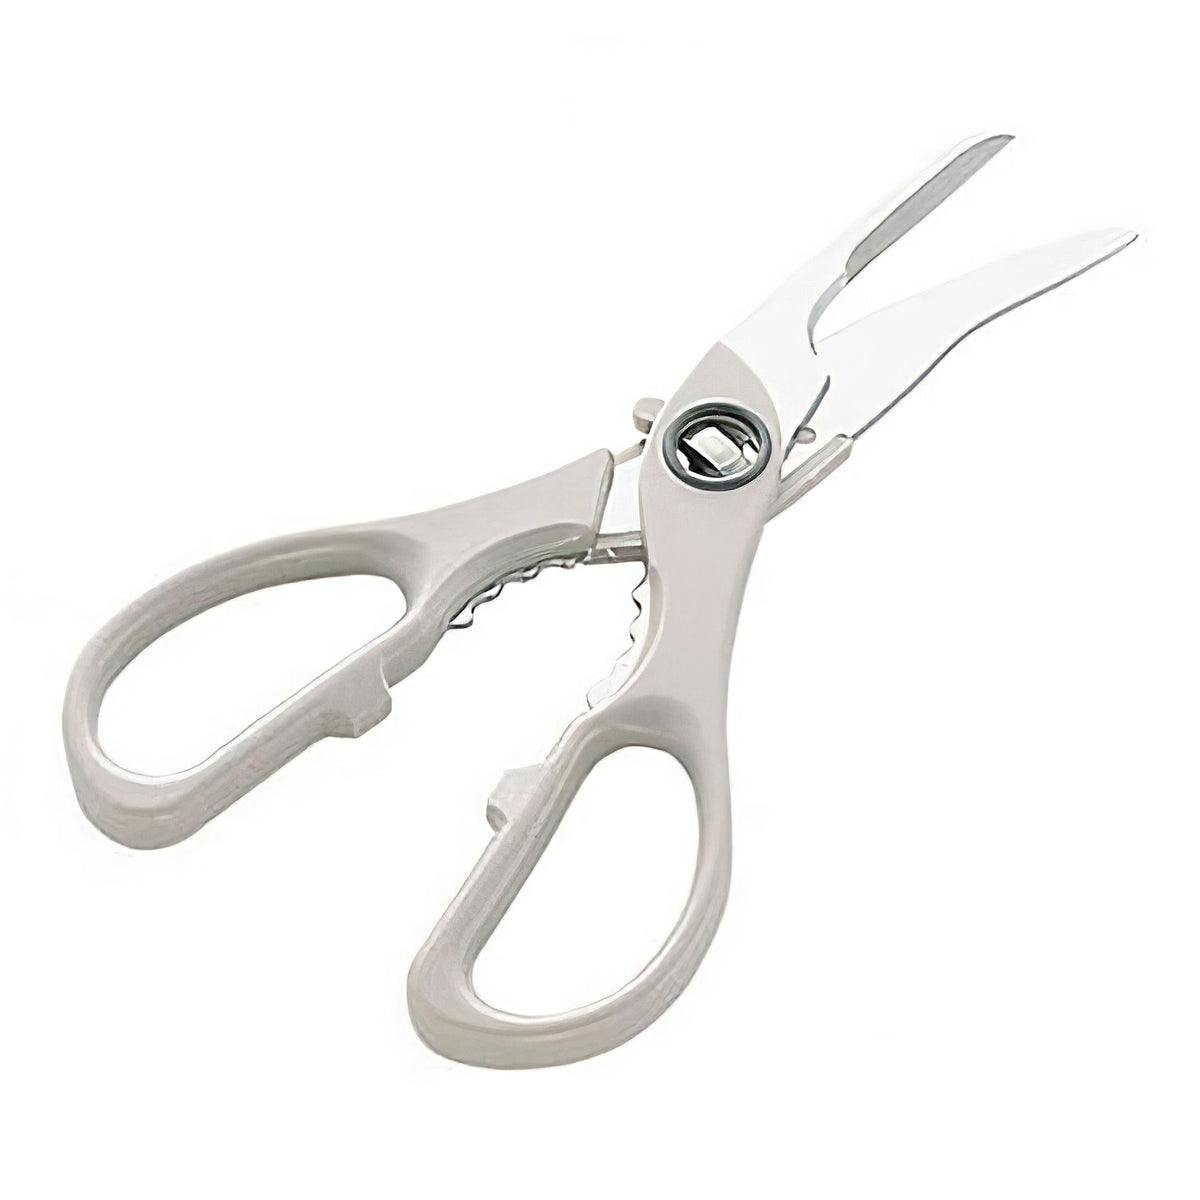 Marusho SILKY Stainless Steel Crab Cutter Seafood Scissors